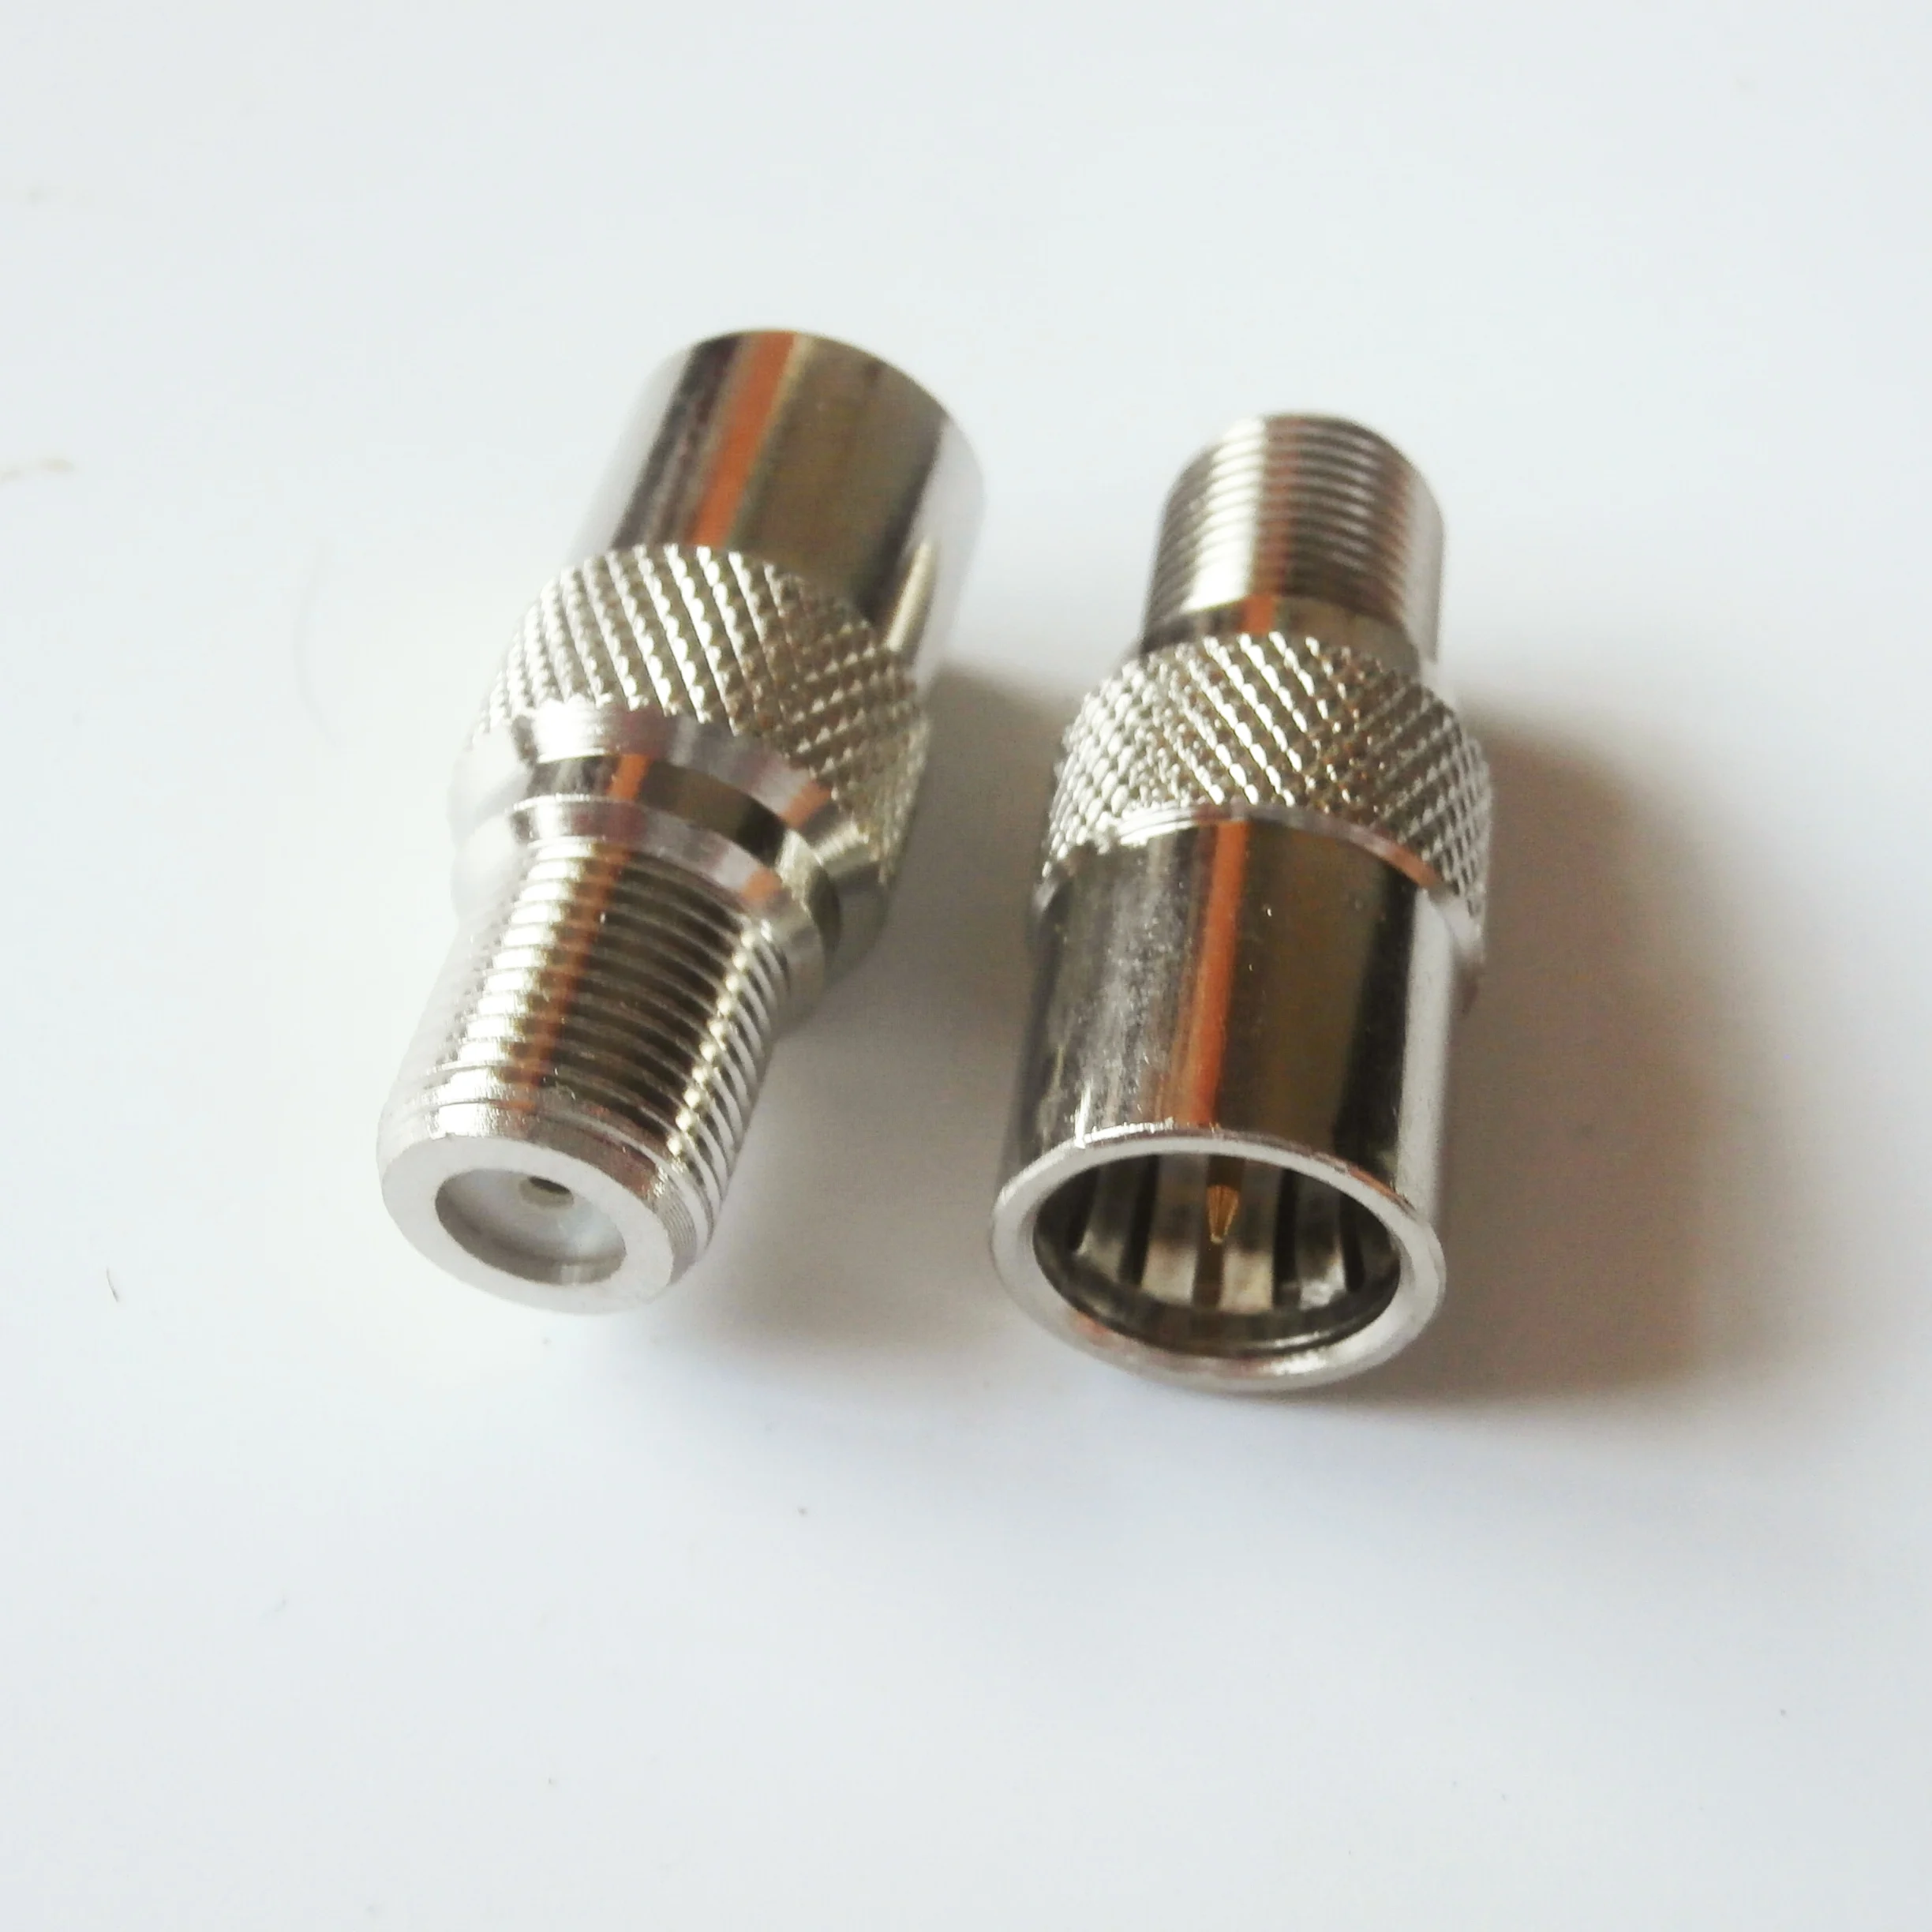 1X Pcs F Male With Shrapnel To F Female push-on Slide-on Quick Directly plug RF Video Coaxial Connector for TV-Tuner Antenna